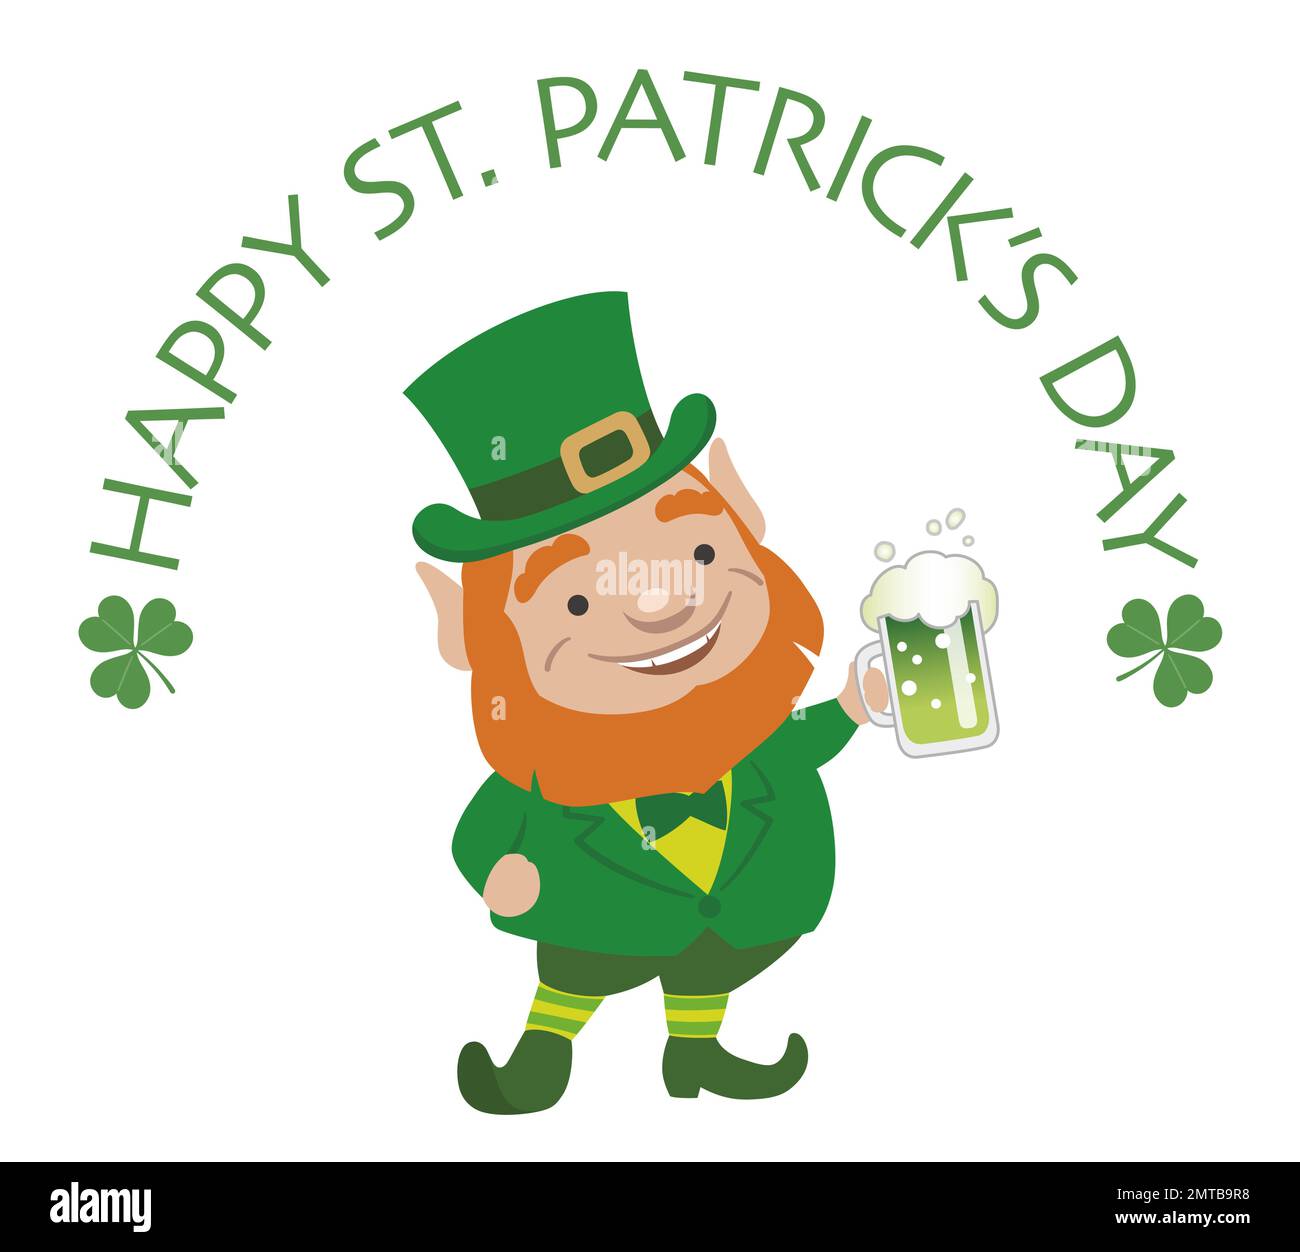 Vector St Patricks Day Symbol Character Holding A Green Beer Mug Isolated On A White Background. Stock Vector